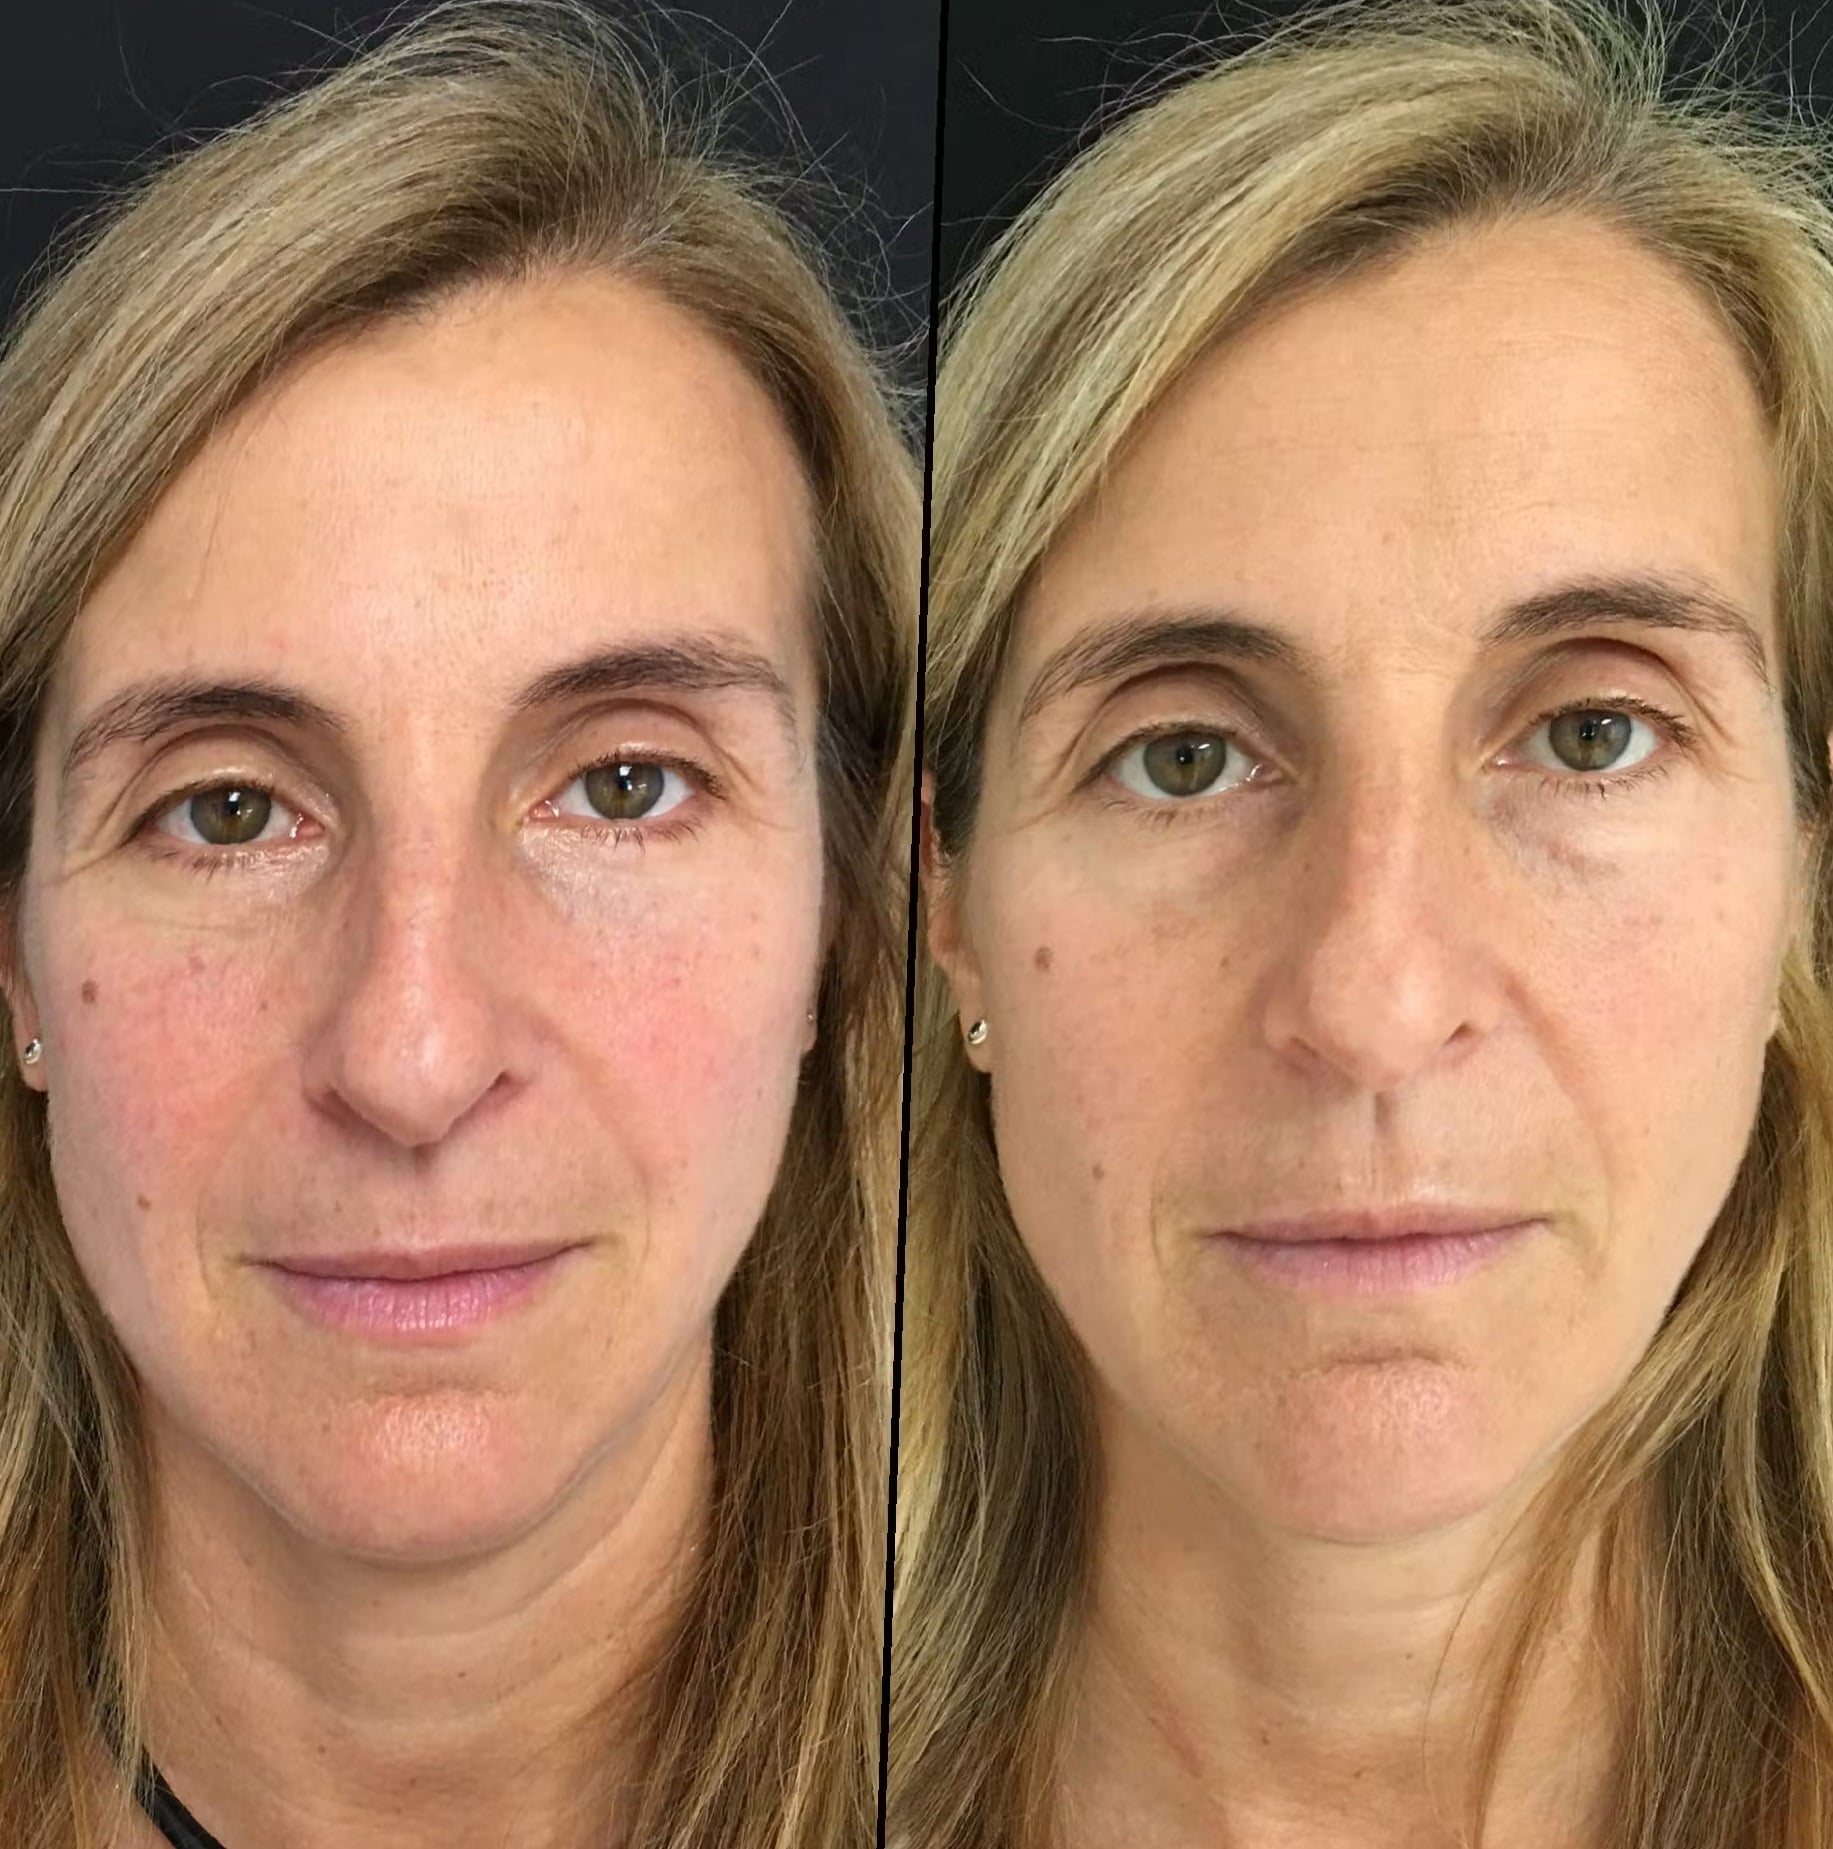 Blepharoplasty-Before-and-After-3